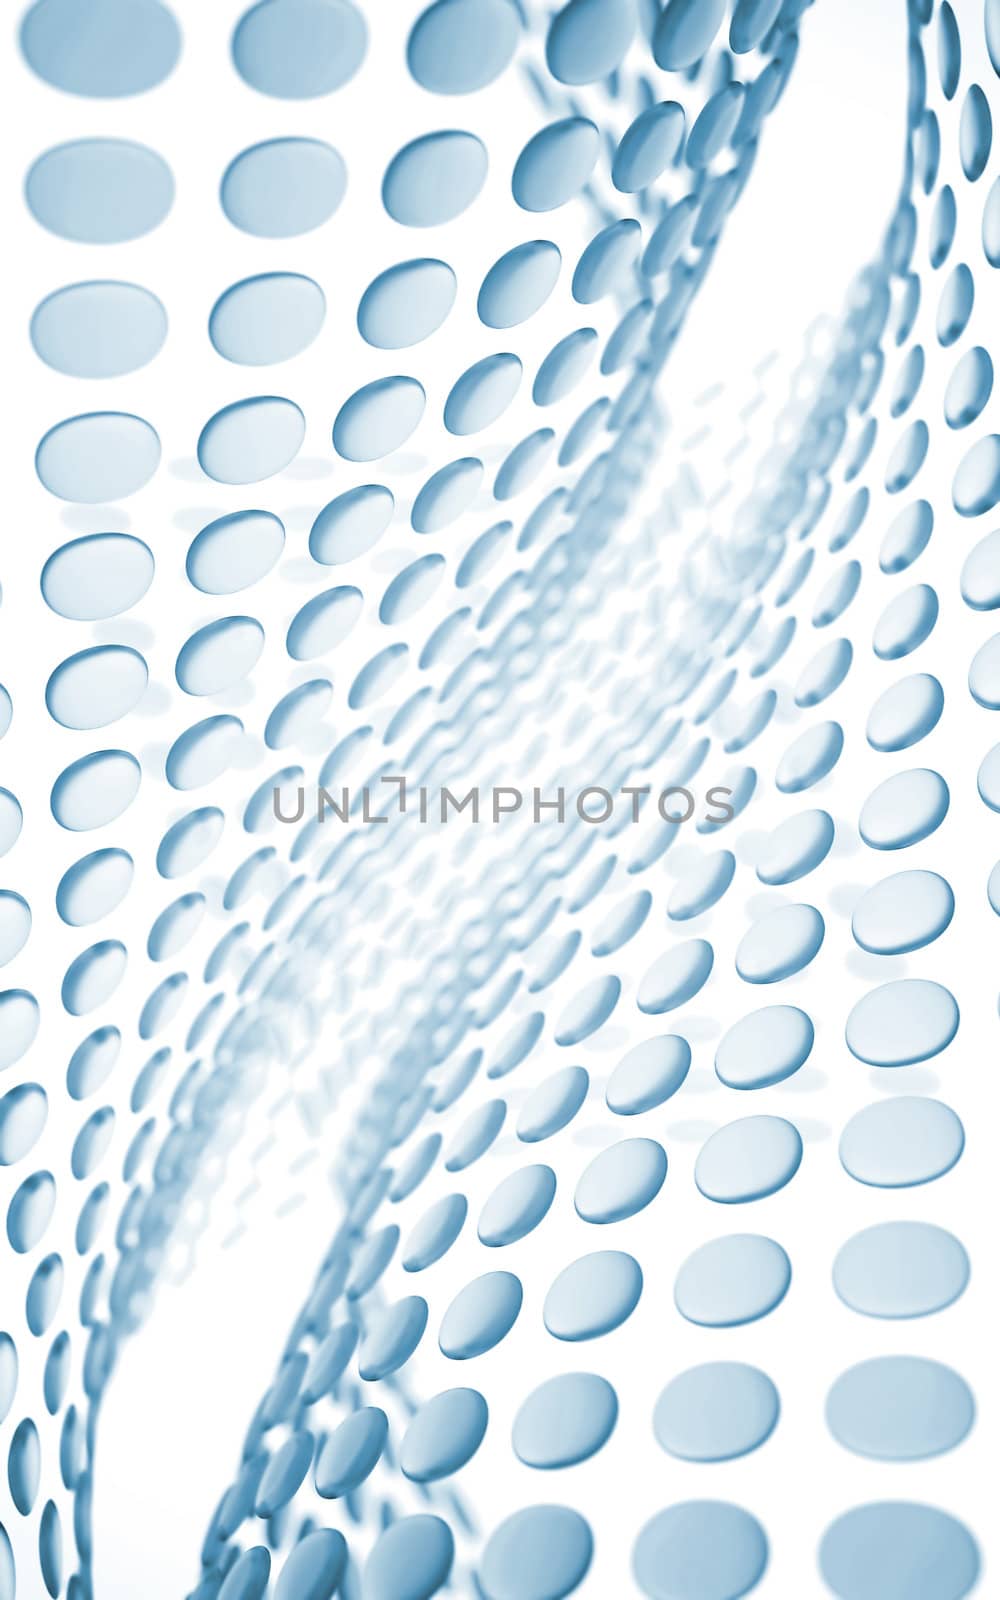 abstract wave of blue plates as a scientific and technological background